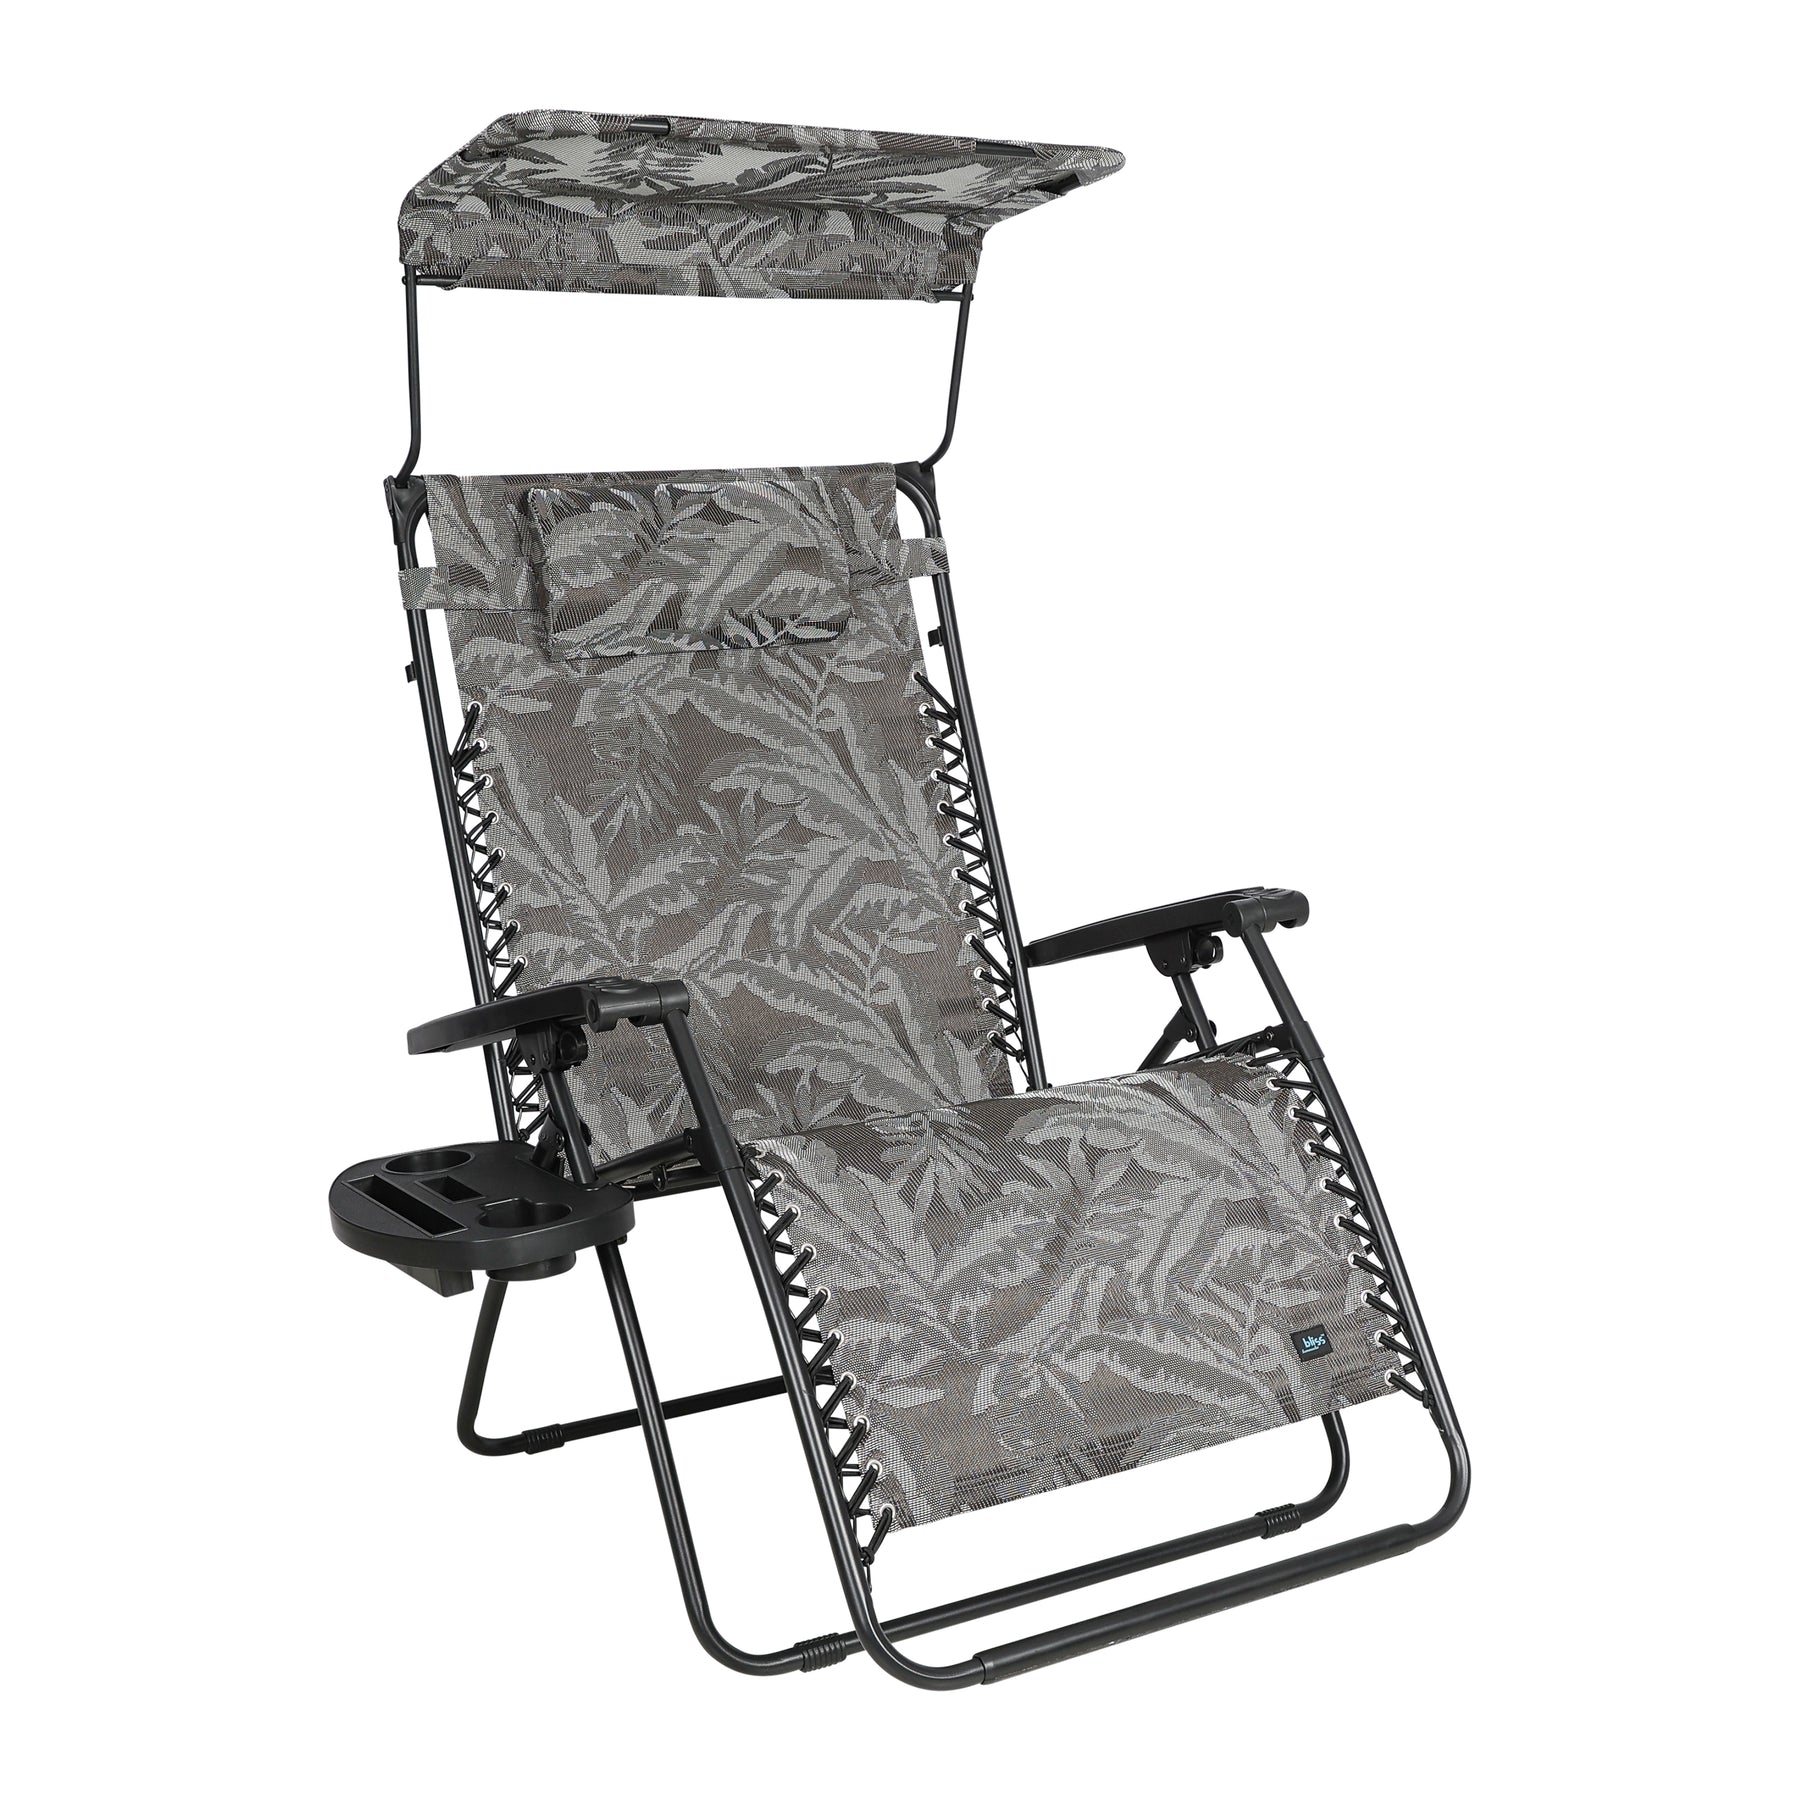 Bliss Hammocks 33-inch Wide XXL Zero Gravity Chair with Adjustable Canopy Sun-Shade, Drink Tray, and Adjustable Pillow in the platinum fern variation.